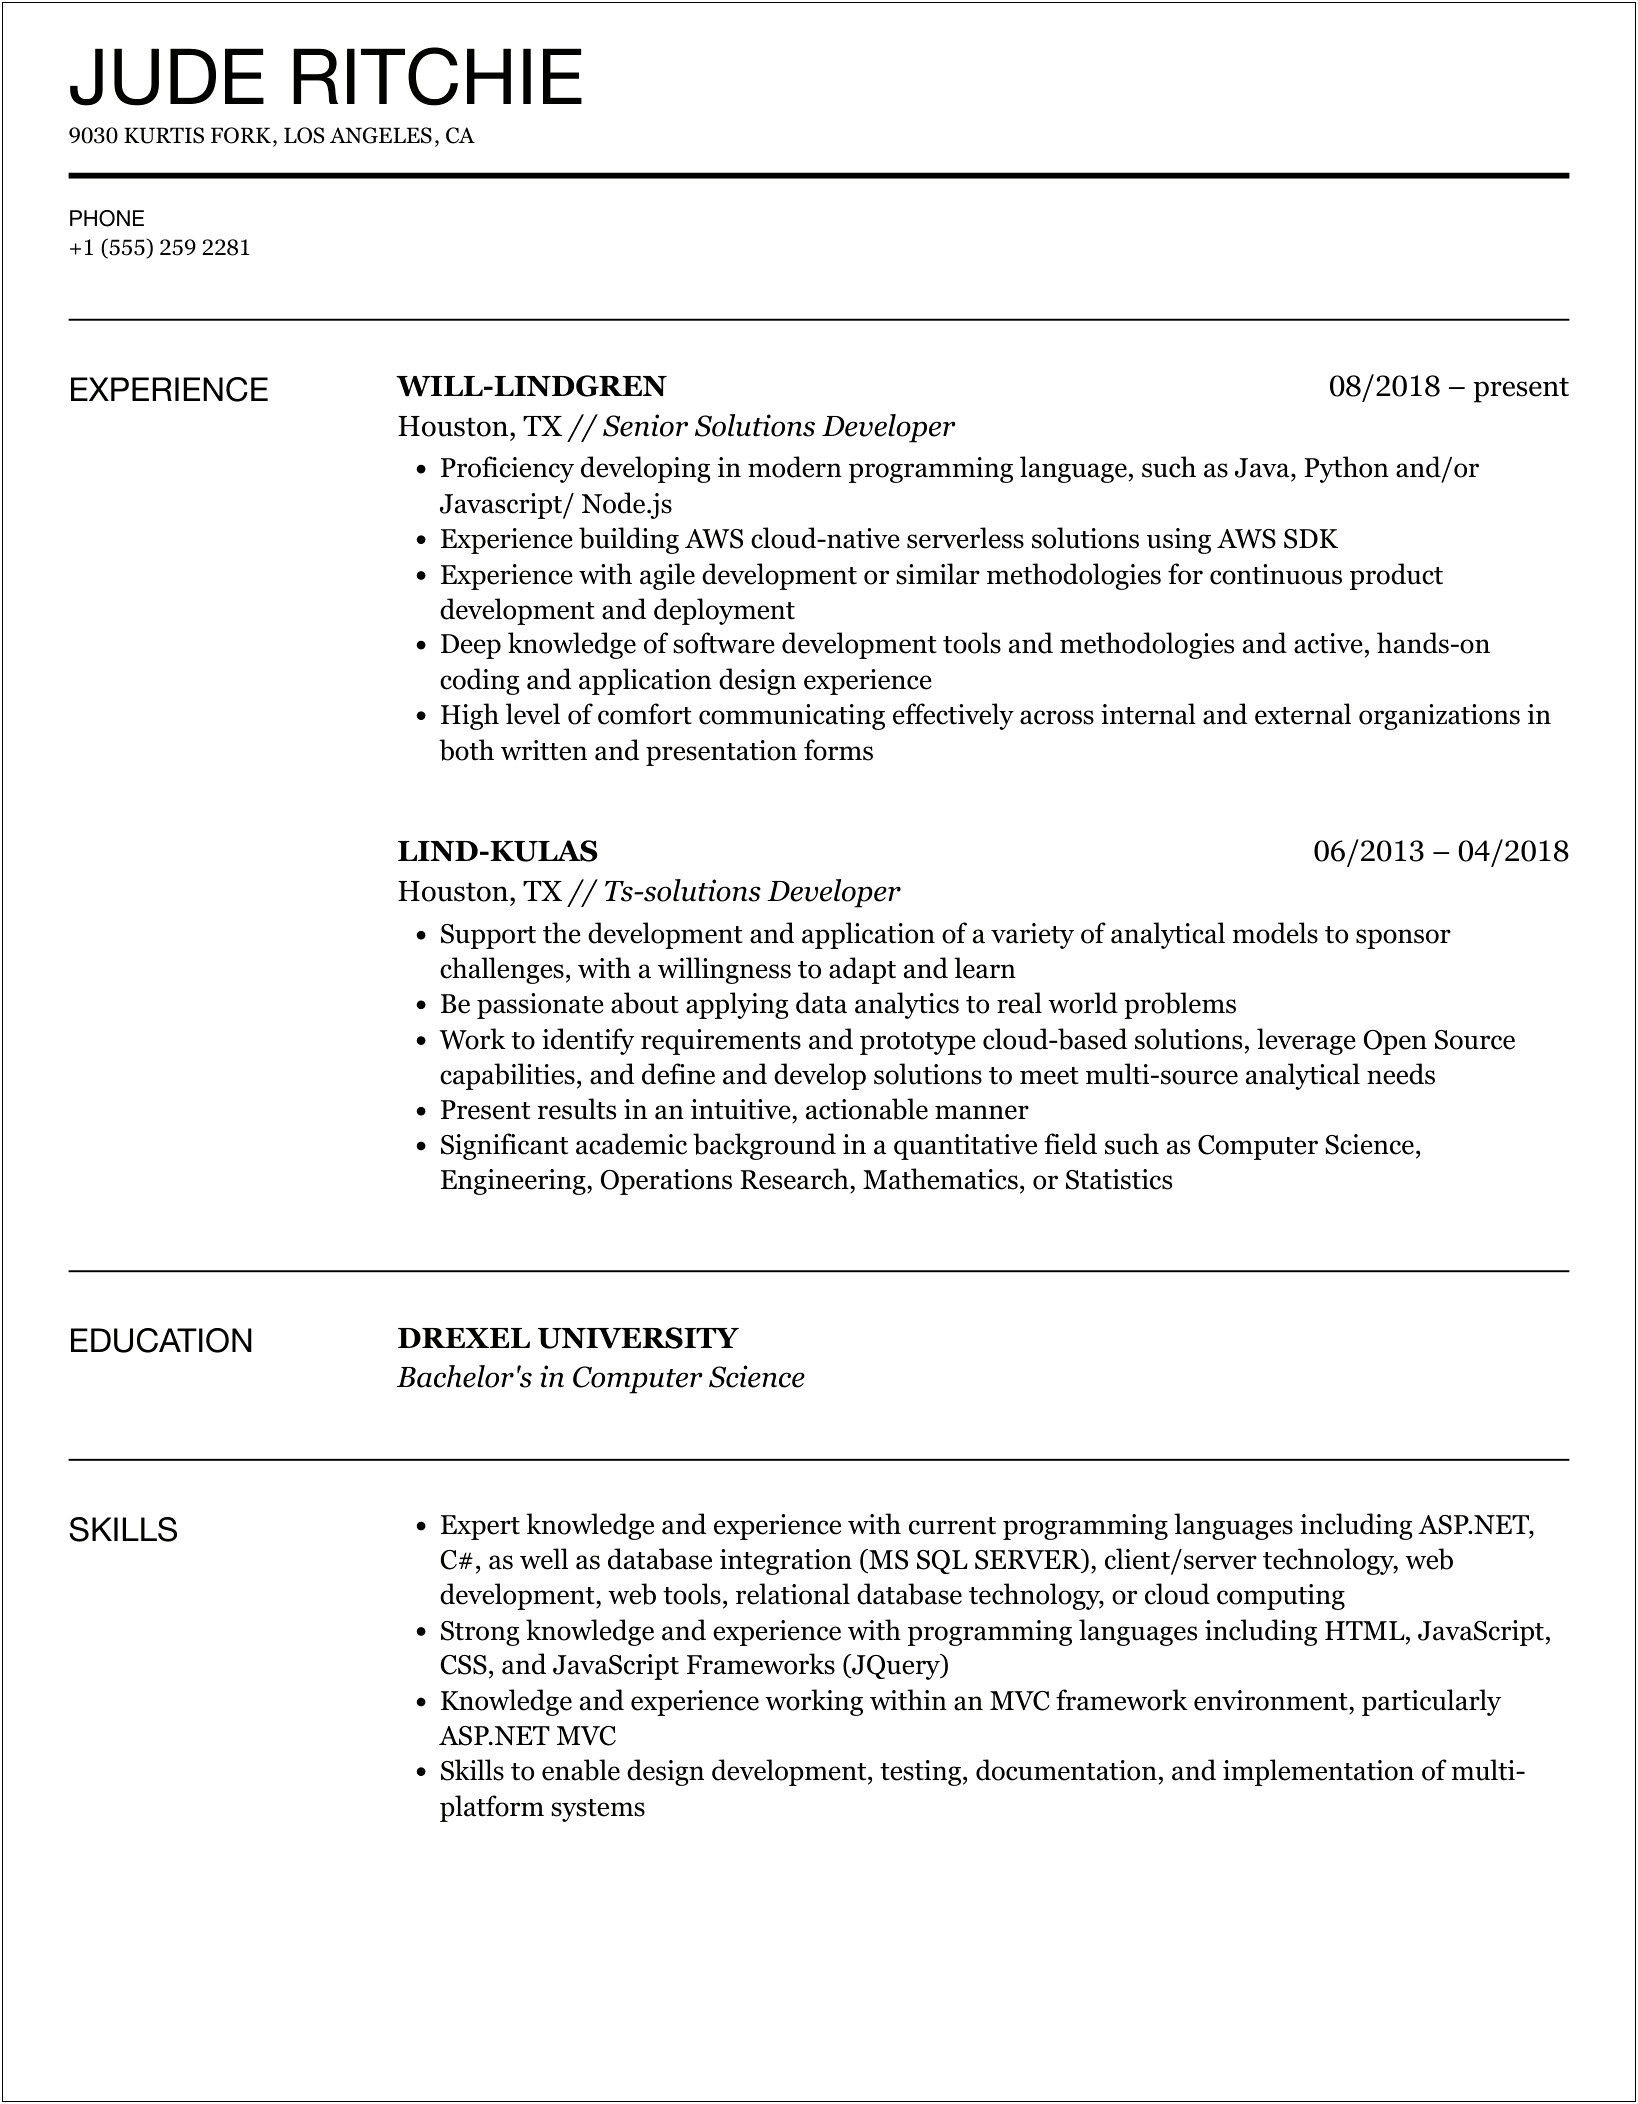 Updating Oms Experience In C++ Resume